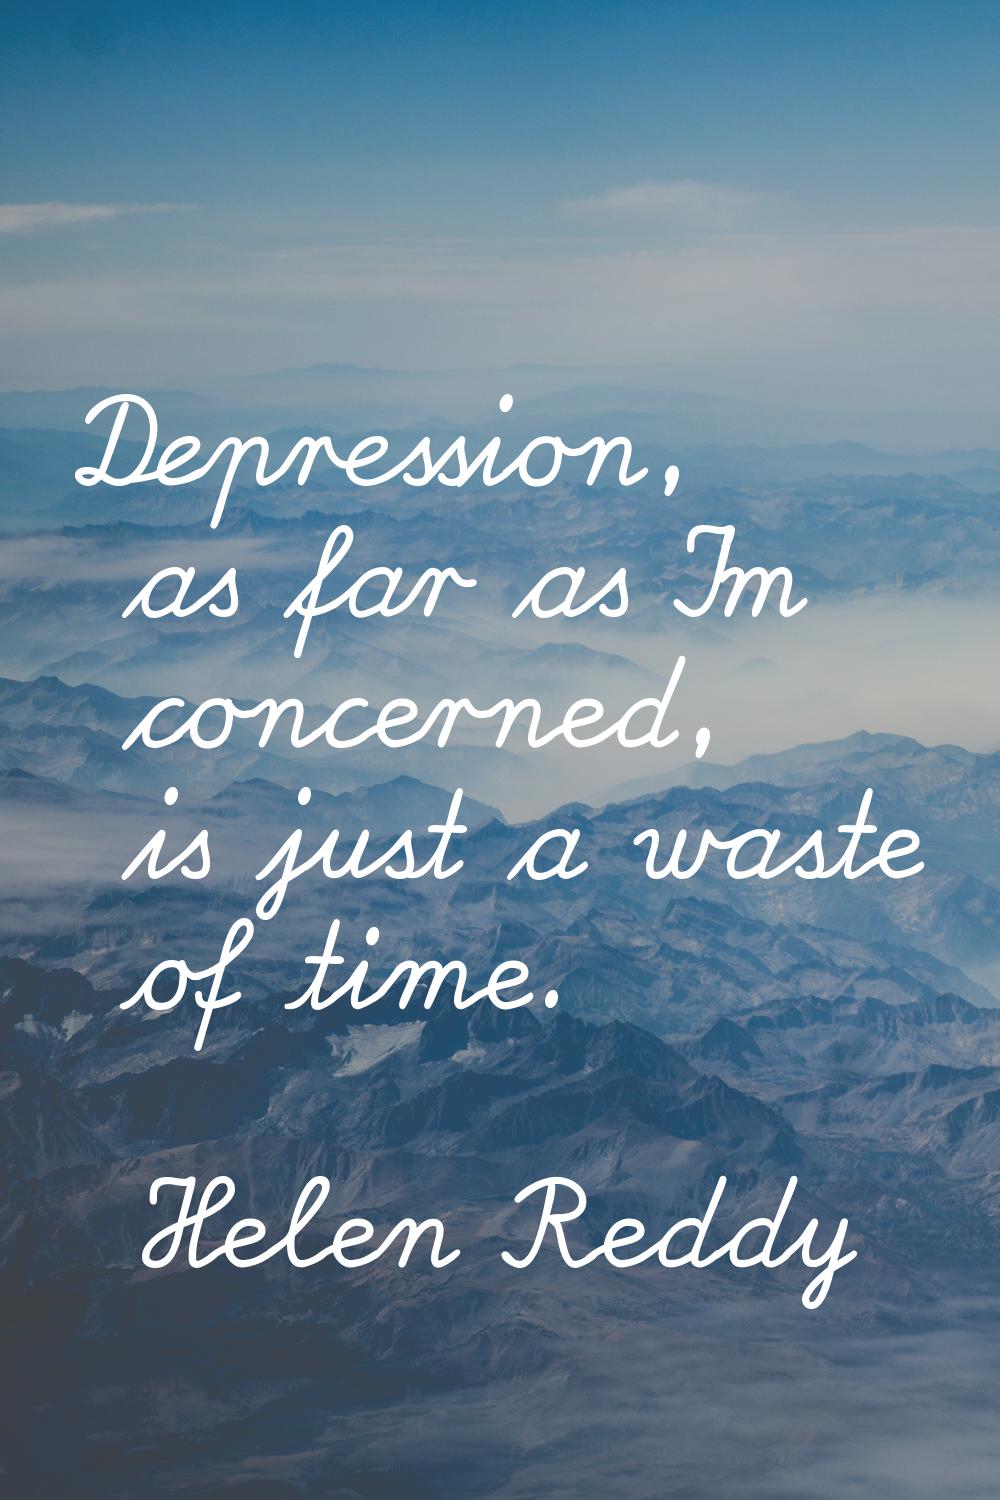 Depression, as far as I'm concerned, is just a waste of time.